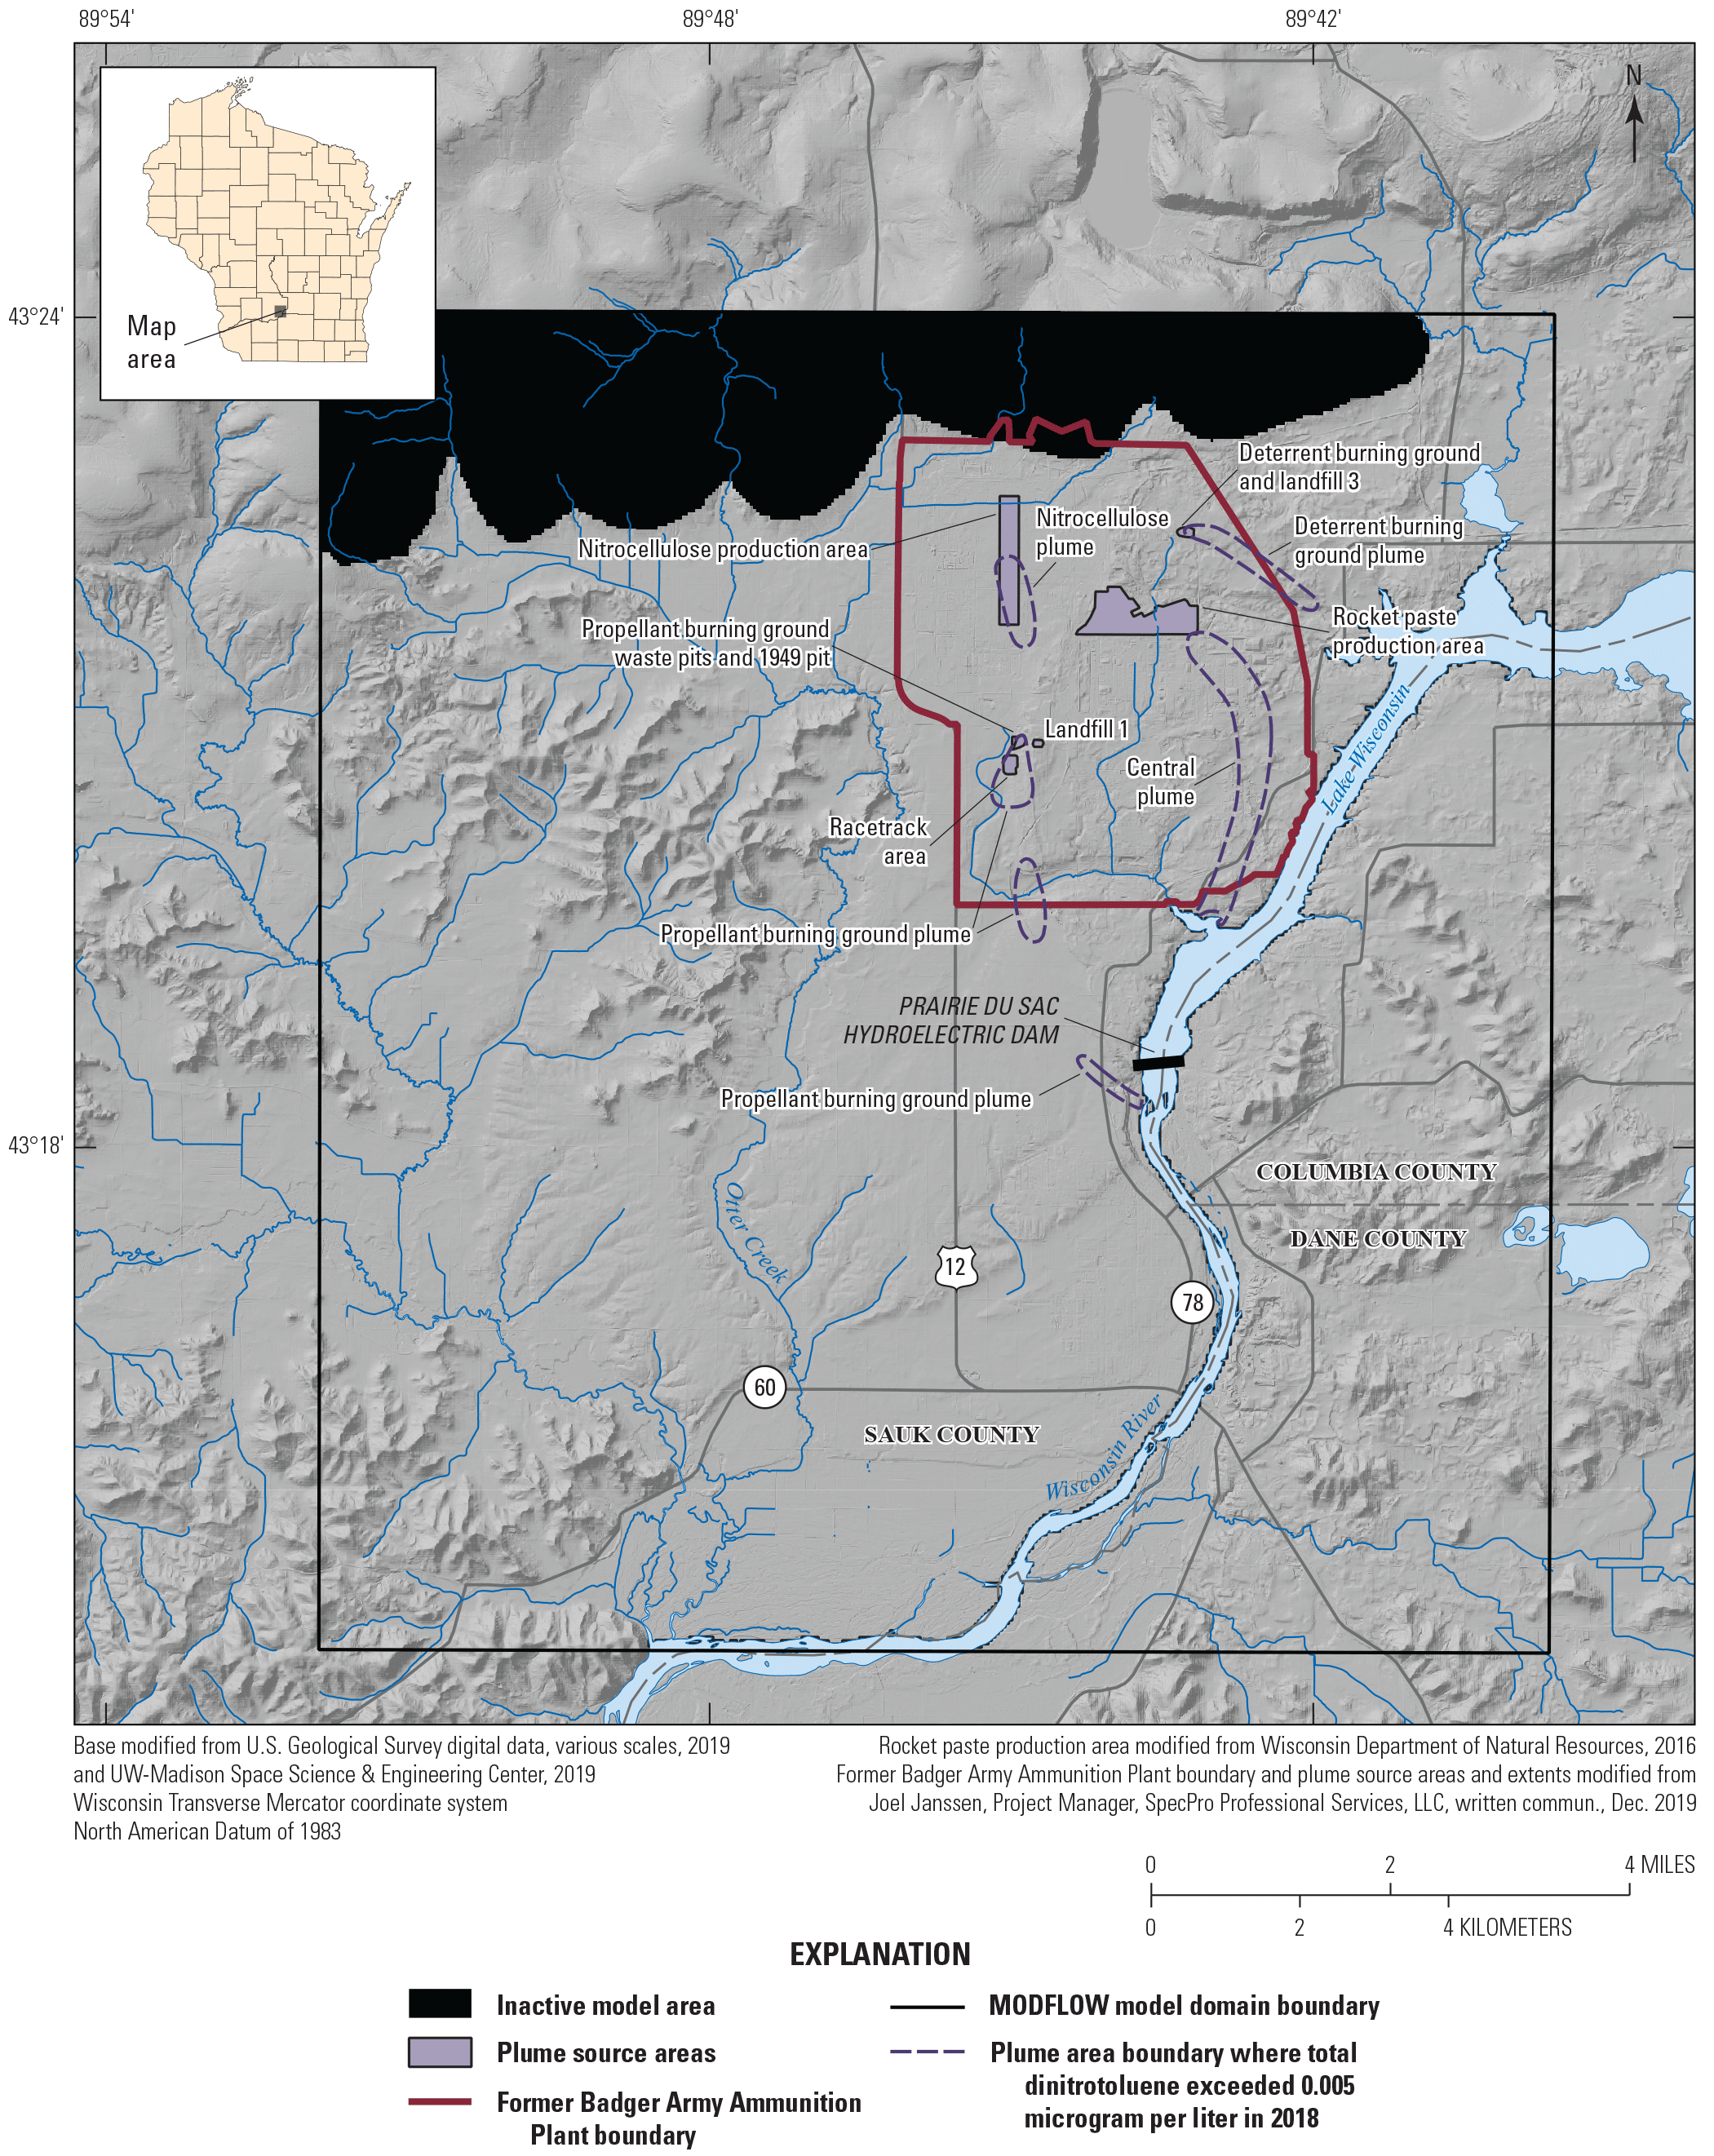 The BAAP boundary and site areas are mostly in one-quarter of the model domain area.